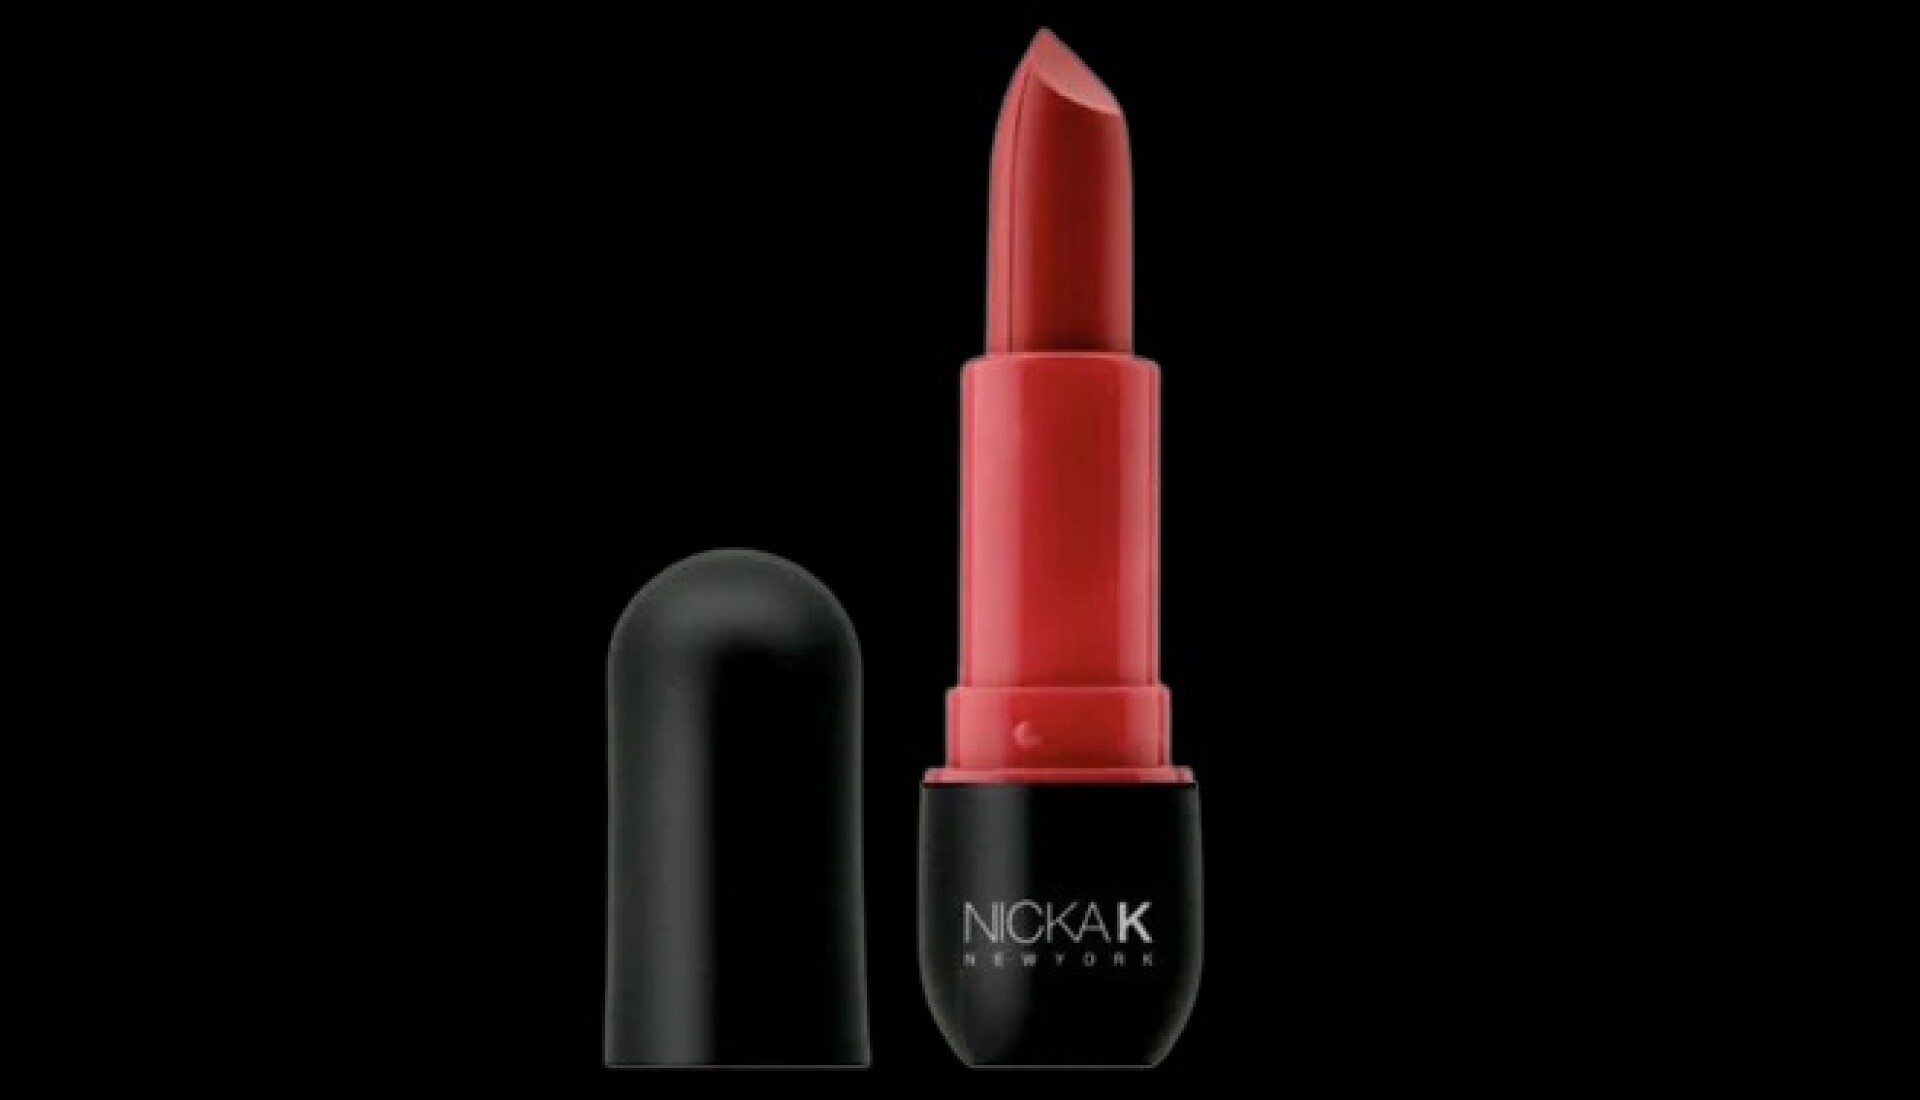 Nicka K Labial Nms02 Red 